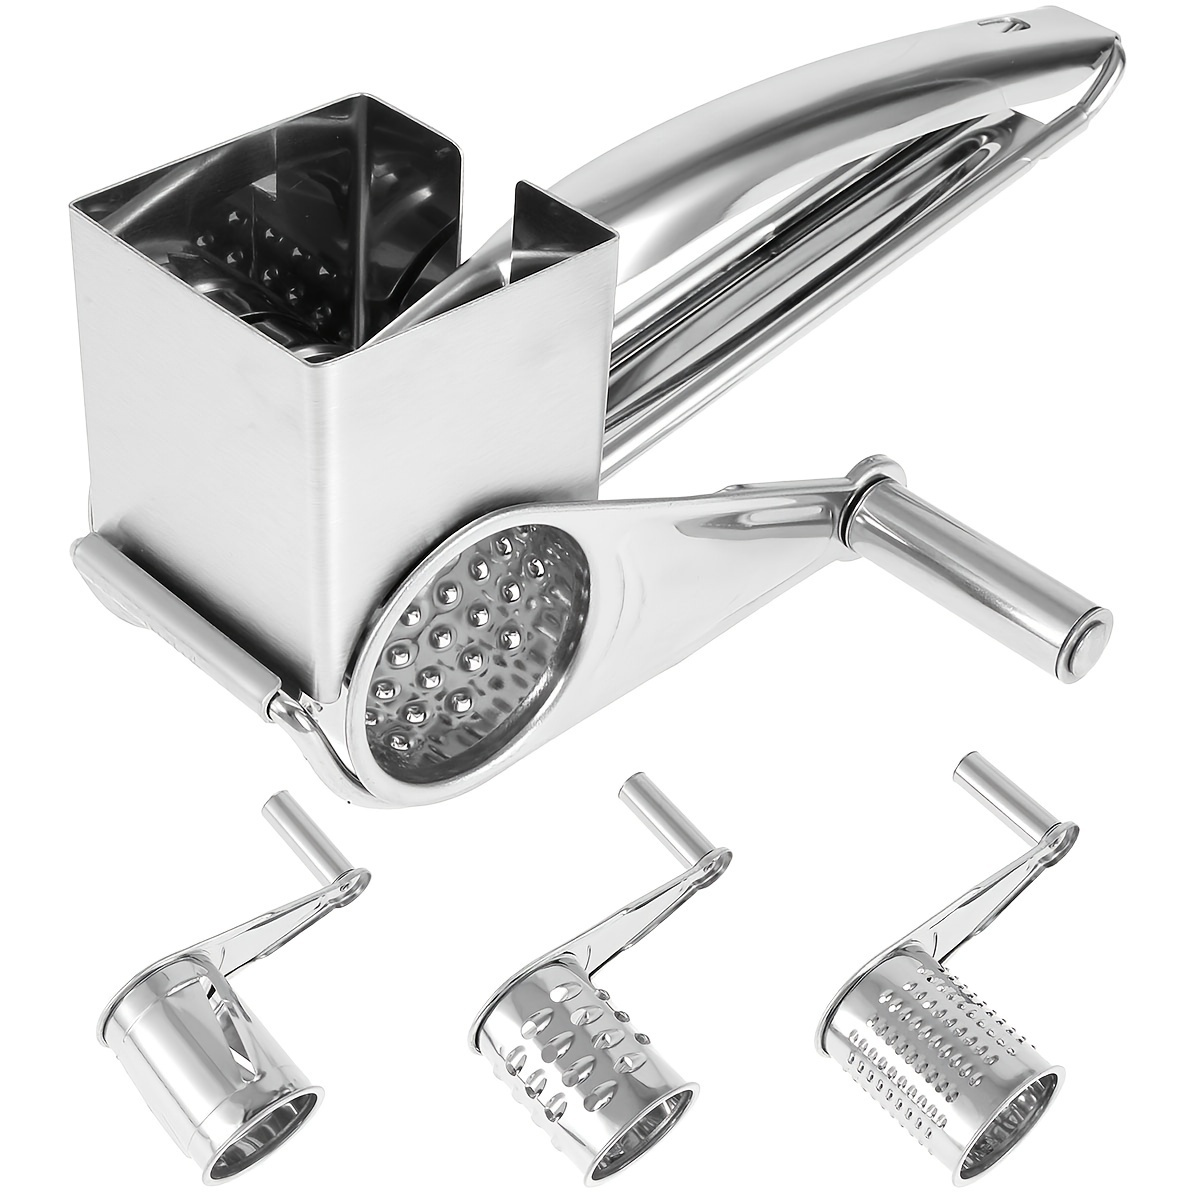 Rotary Cheese Grater Manual Handheld Cheese Grater with Stainless Steel  Drum for Grating Hard Cheese Chocolate Nuts Kitchen Tool (/, Black, 1)